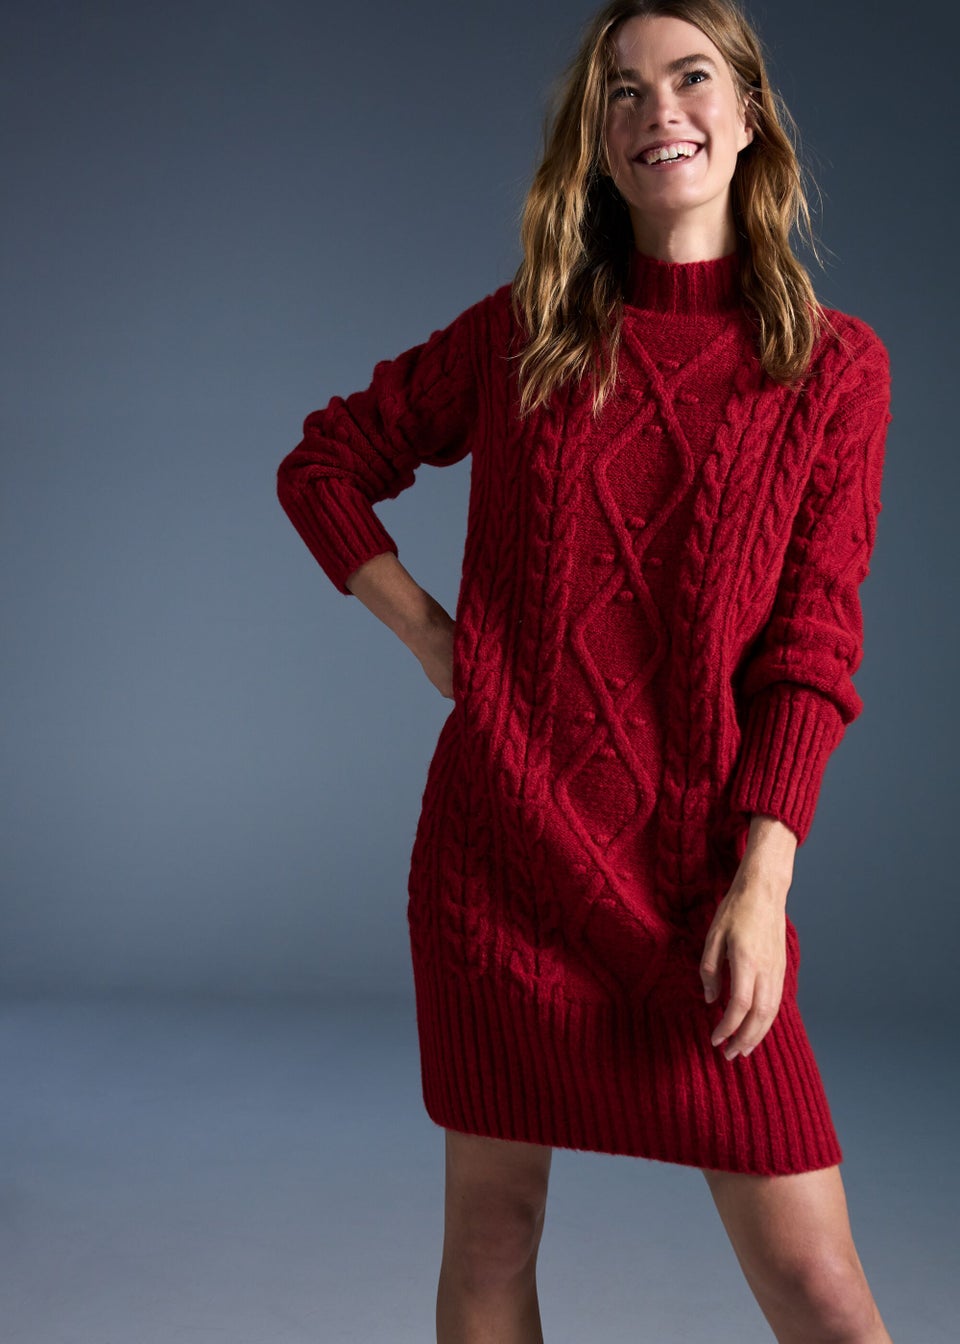 Red Cable Knit Dress